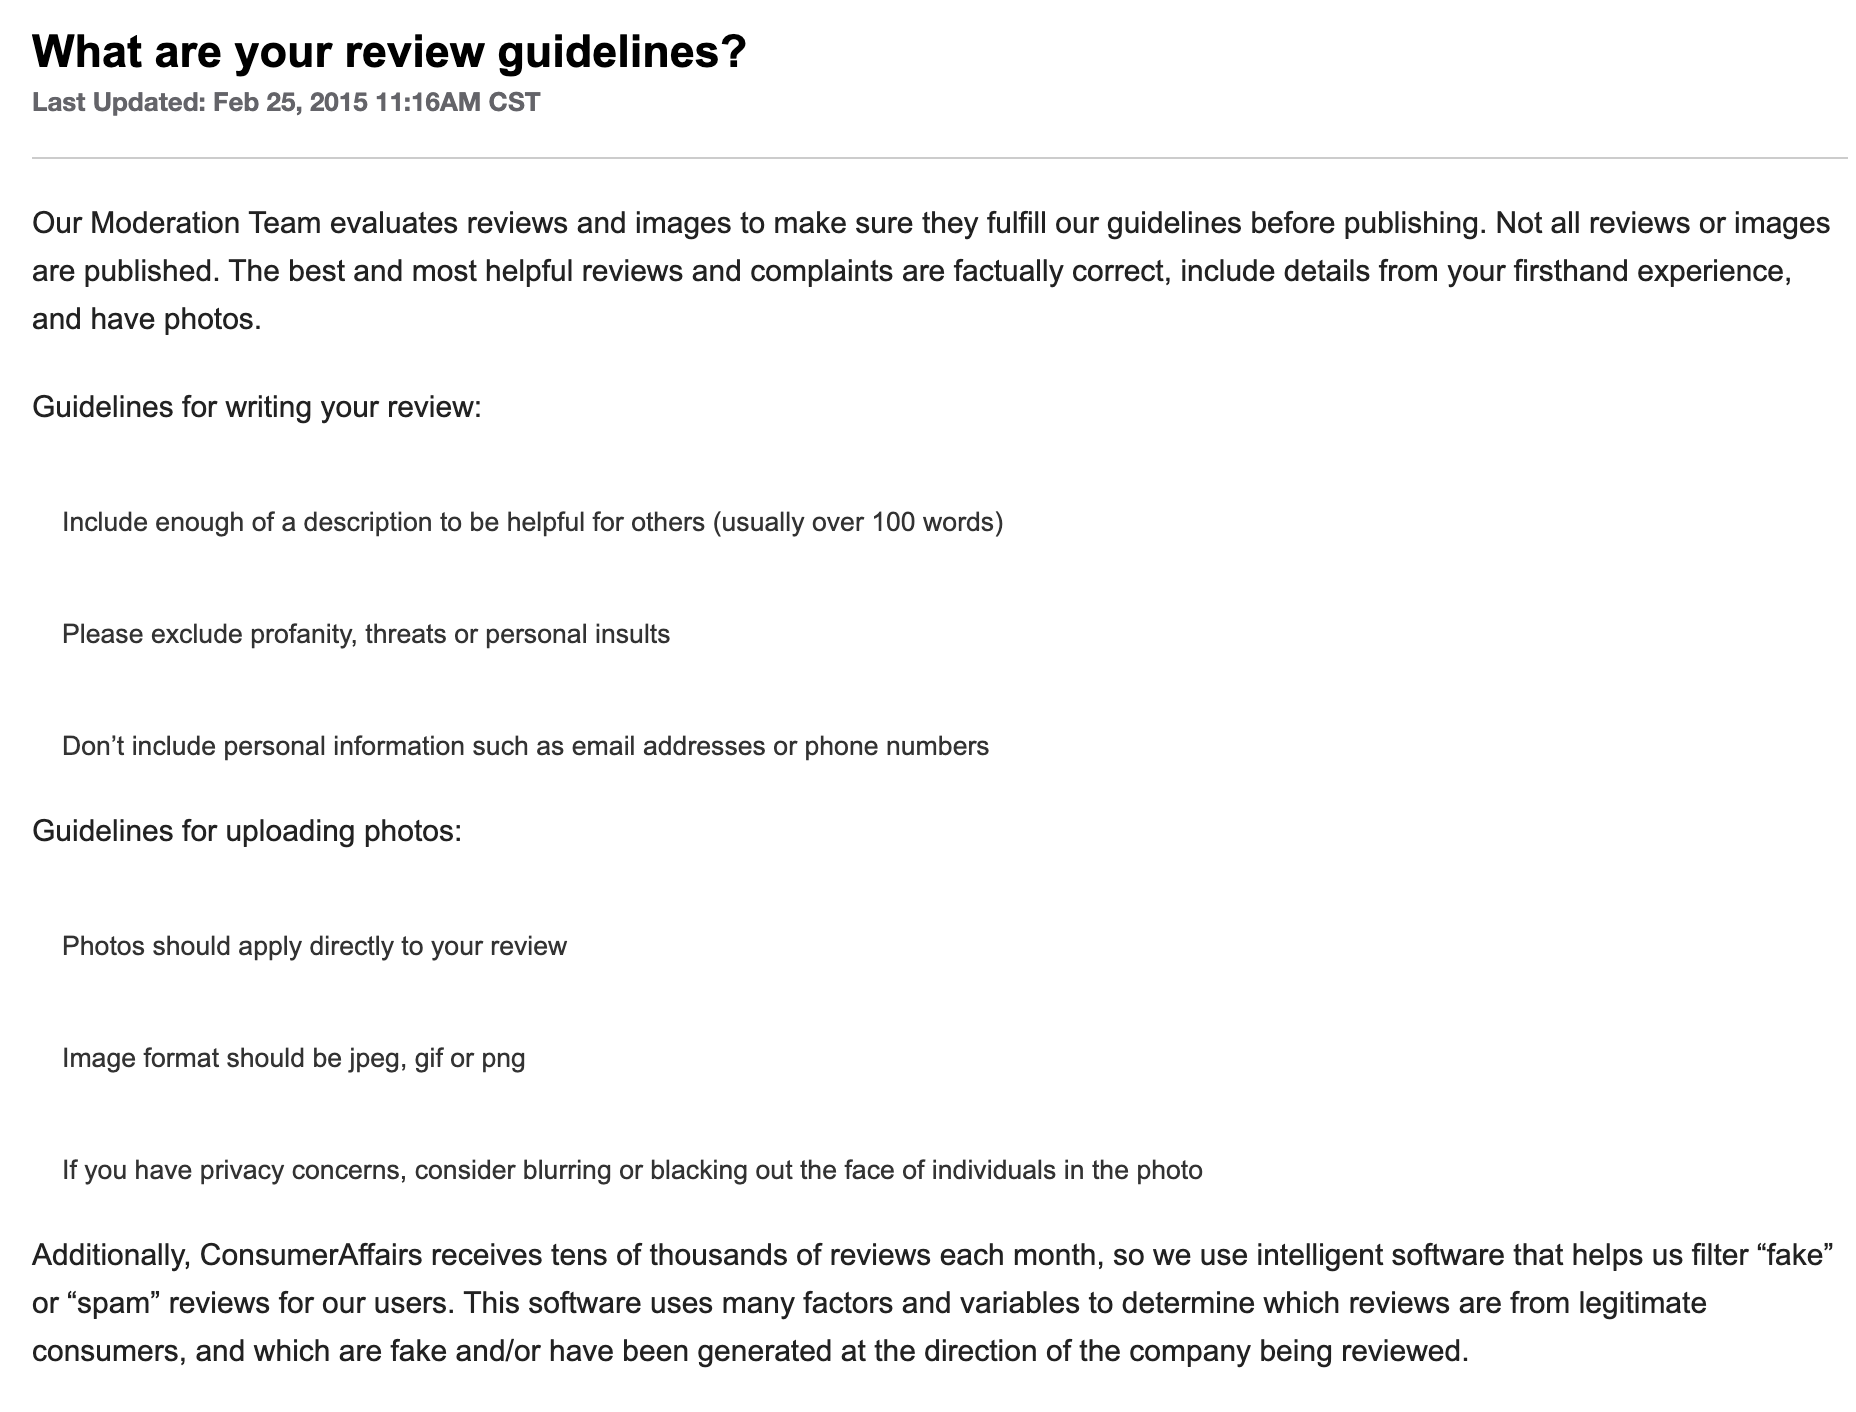 Consumer Affairs review guidelines